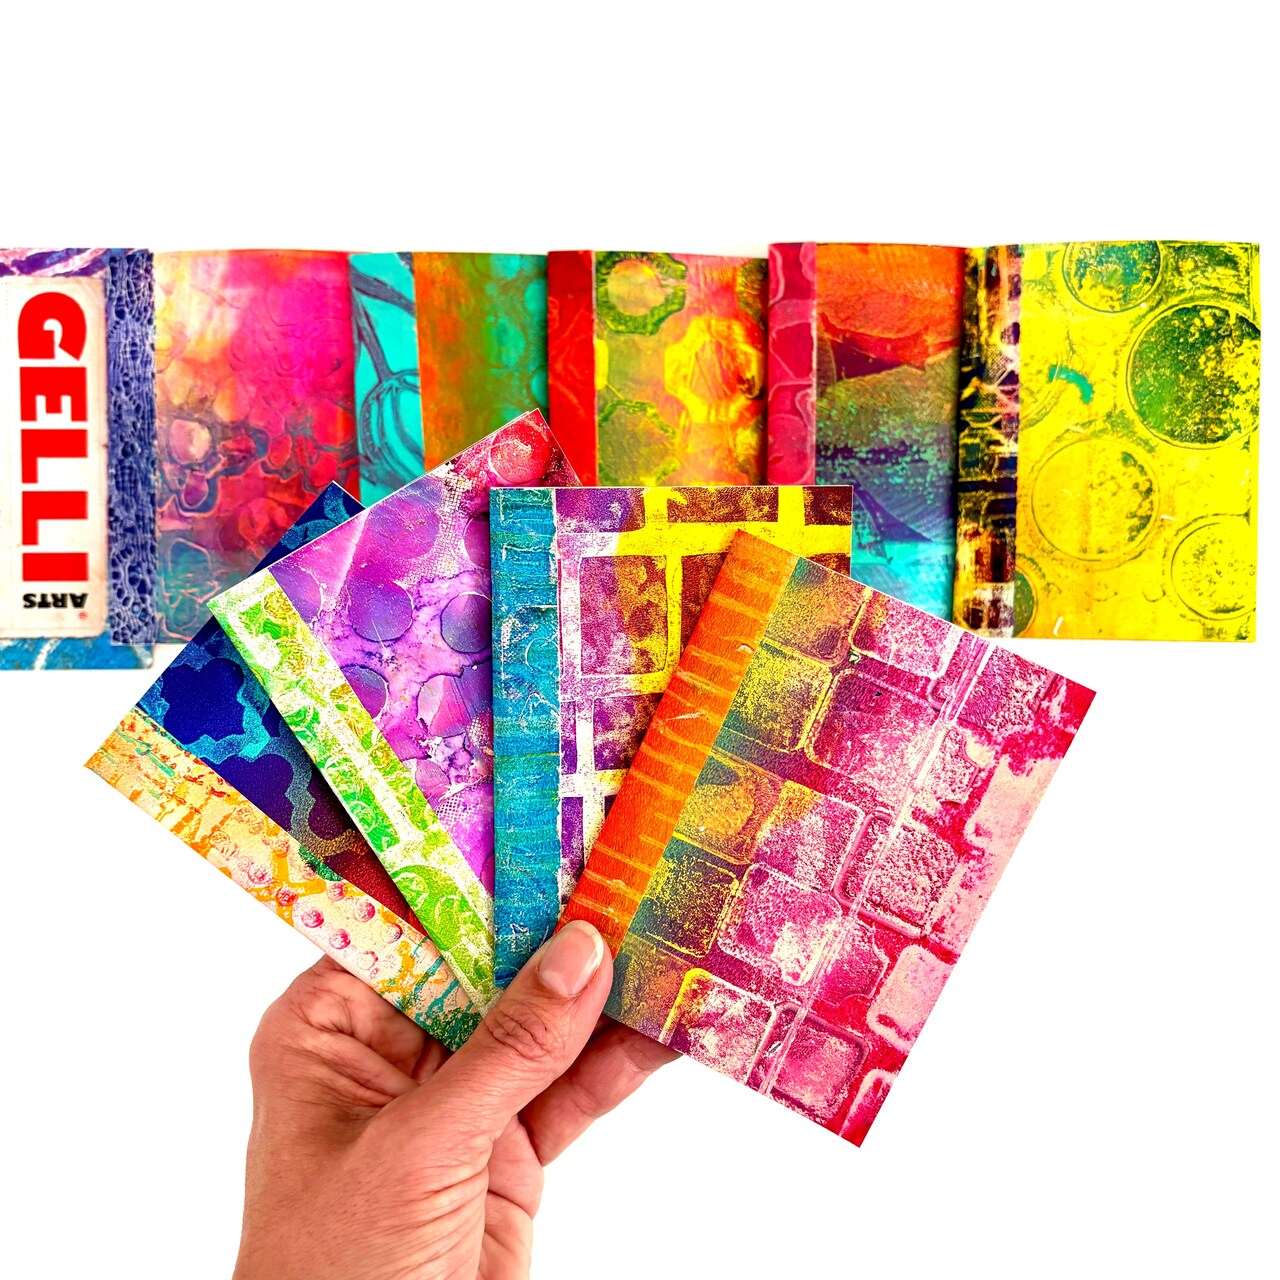 Decorate Notebooks for the New Year with Gelli Arts®